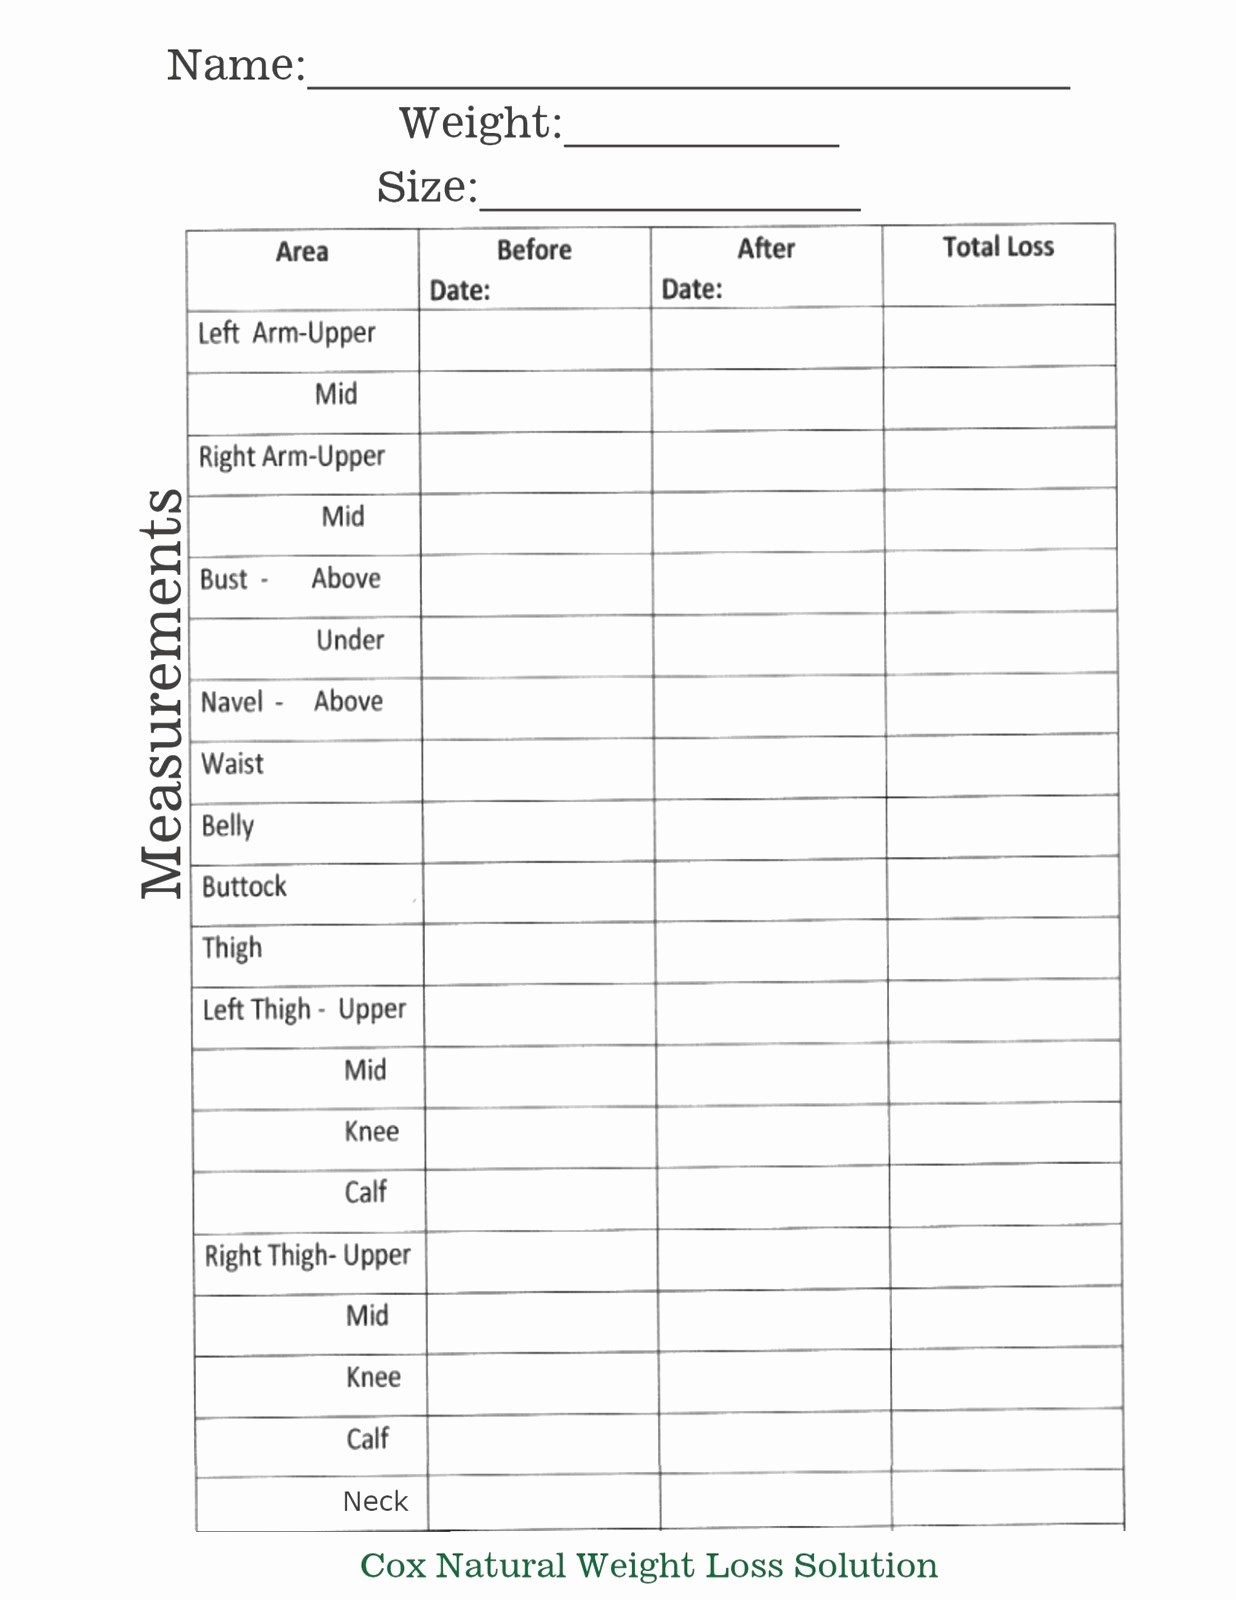 Work Weight Loss Challenge Spreadsheet Awesome Document Group